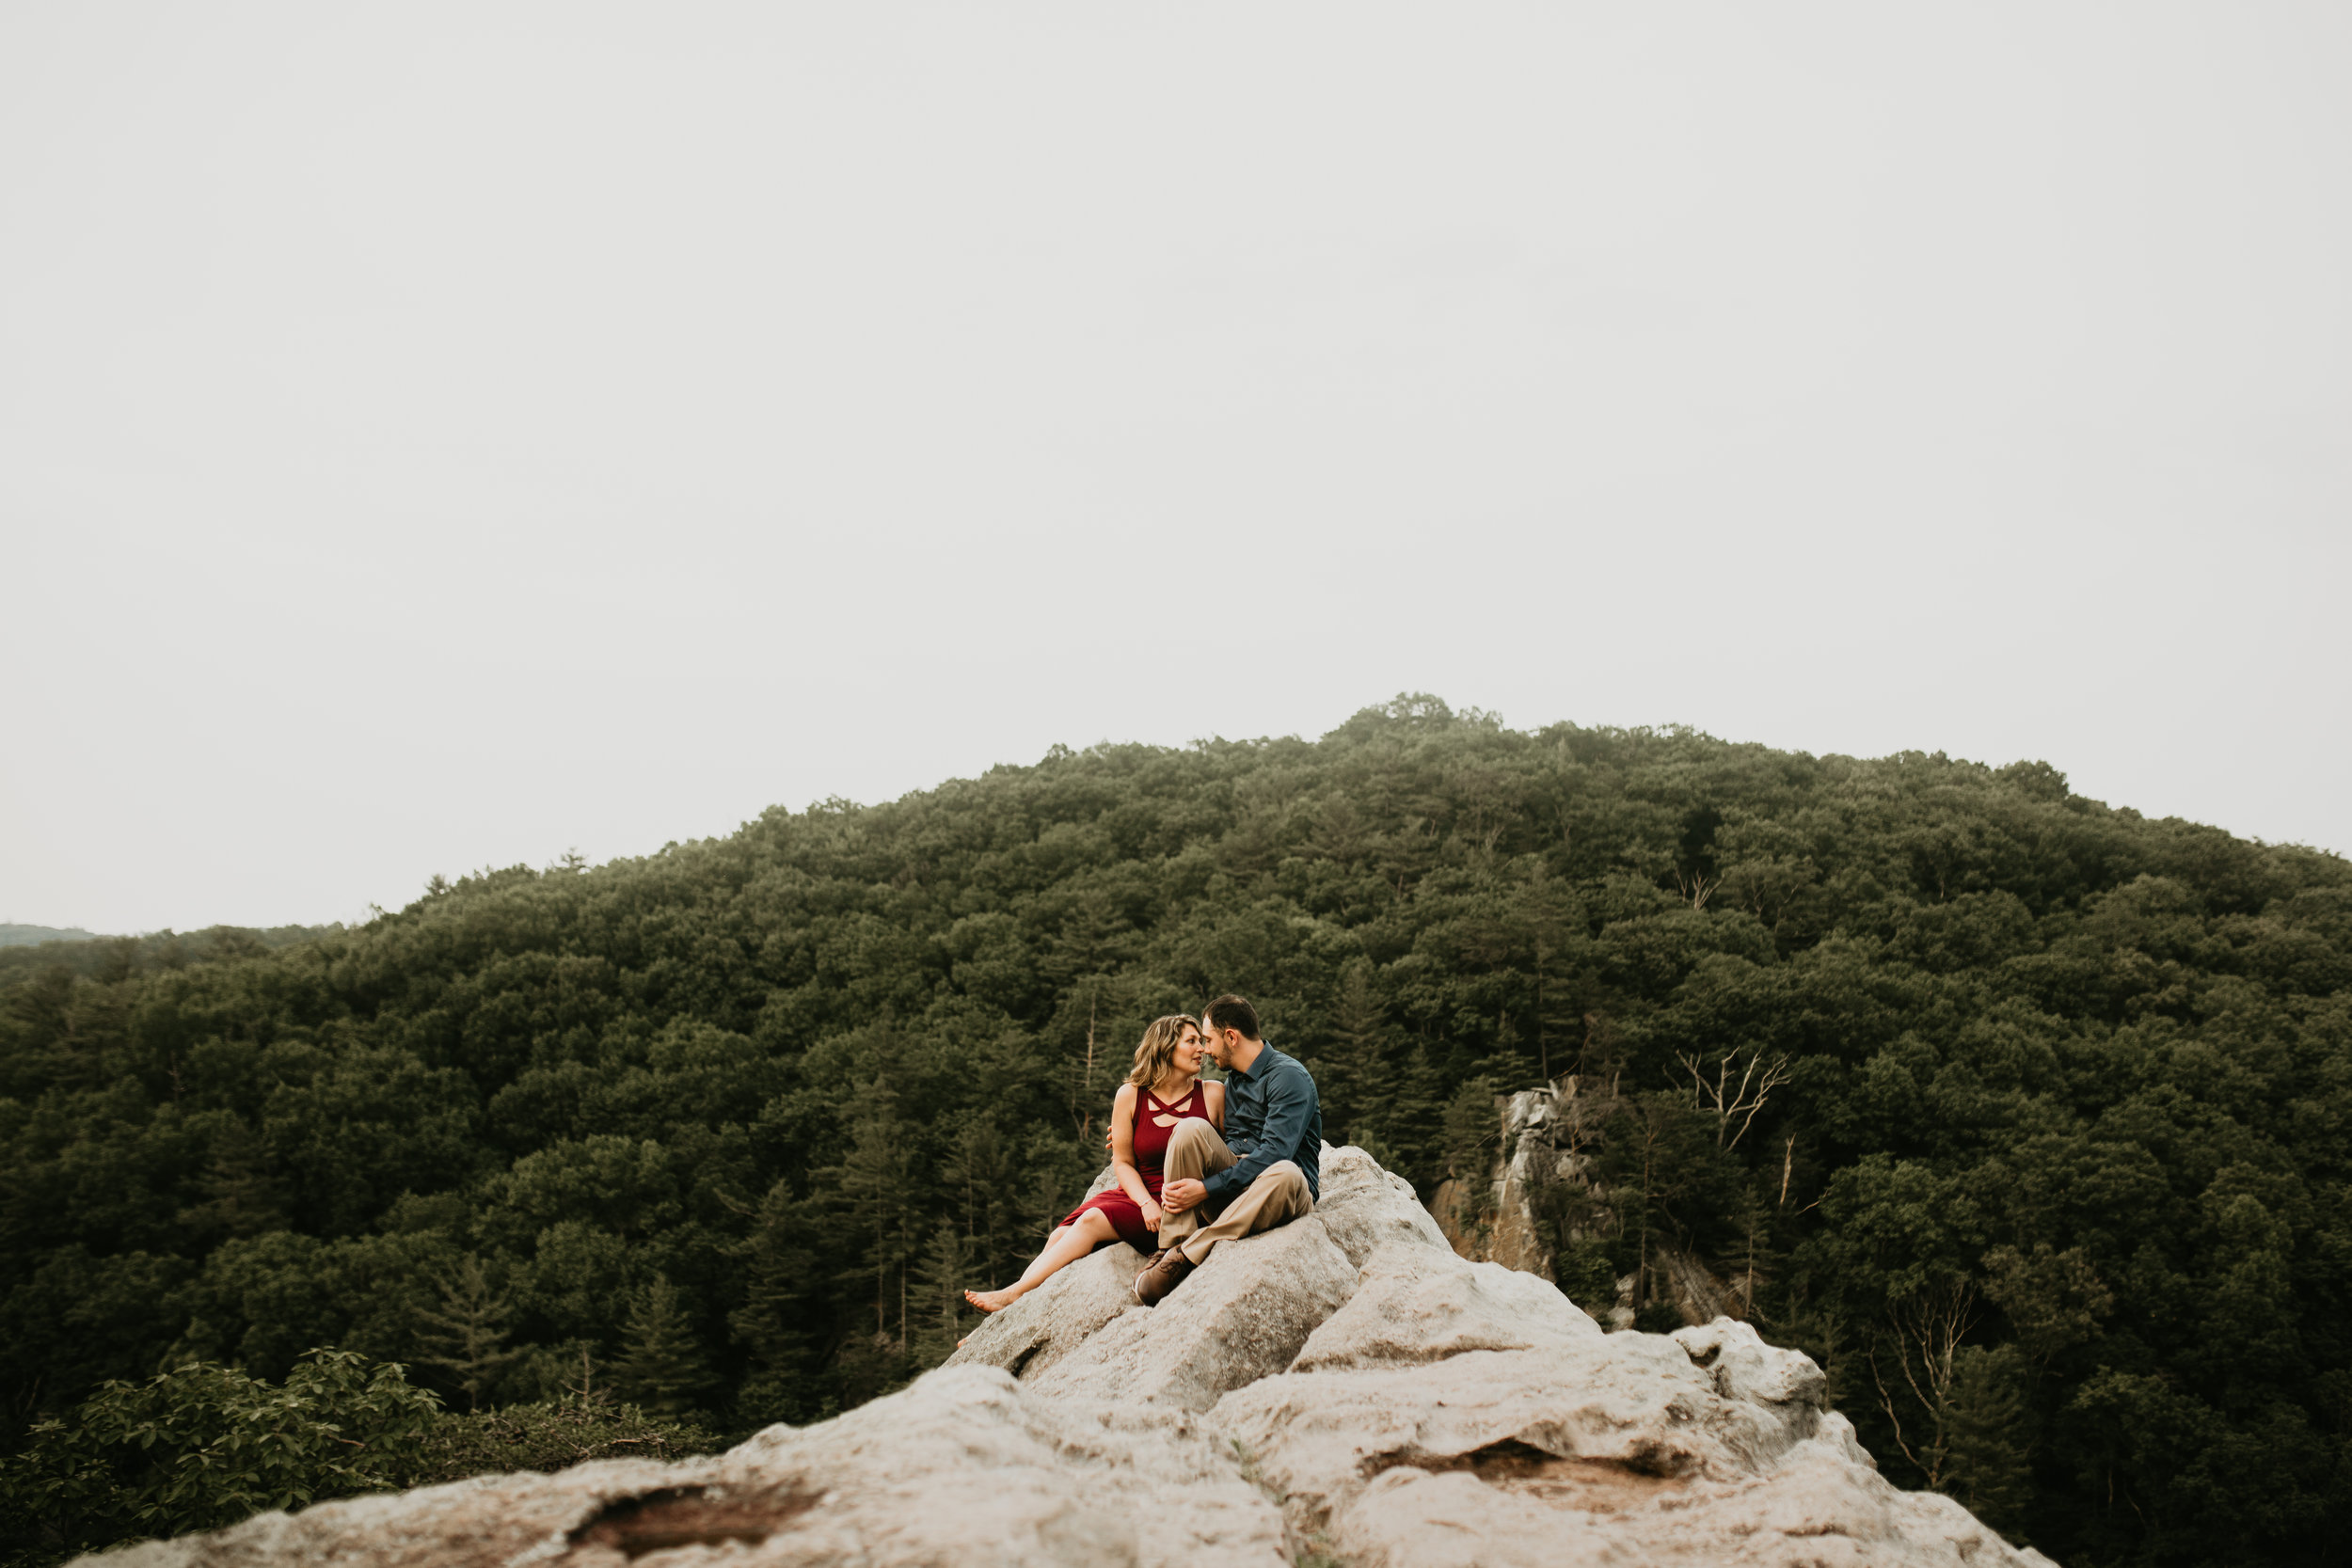 Nicole-Daacke-Photography-rock-state-park-overlook-king-queen-seat-maryland-hiking-adventure-engagement-session-photos-portraits-summer-bel-air-dog-engagement-session-32.jpg